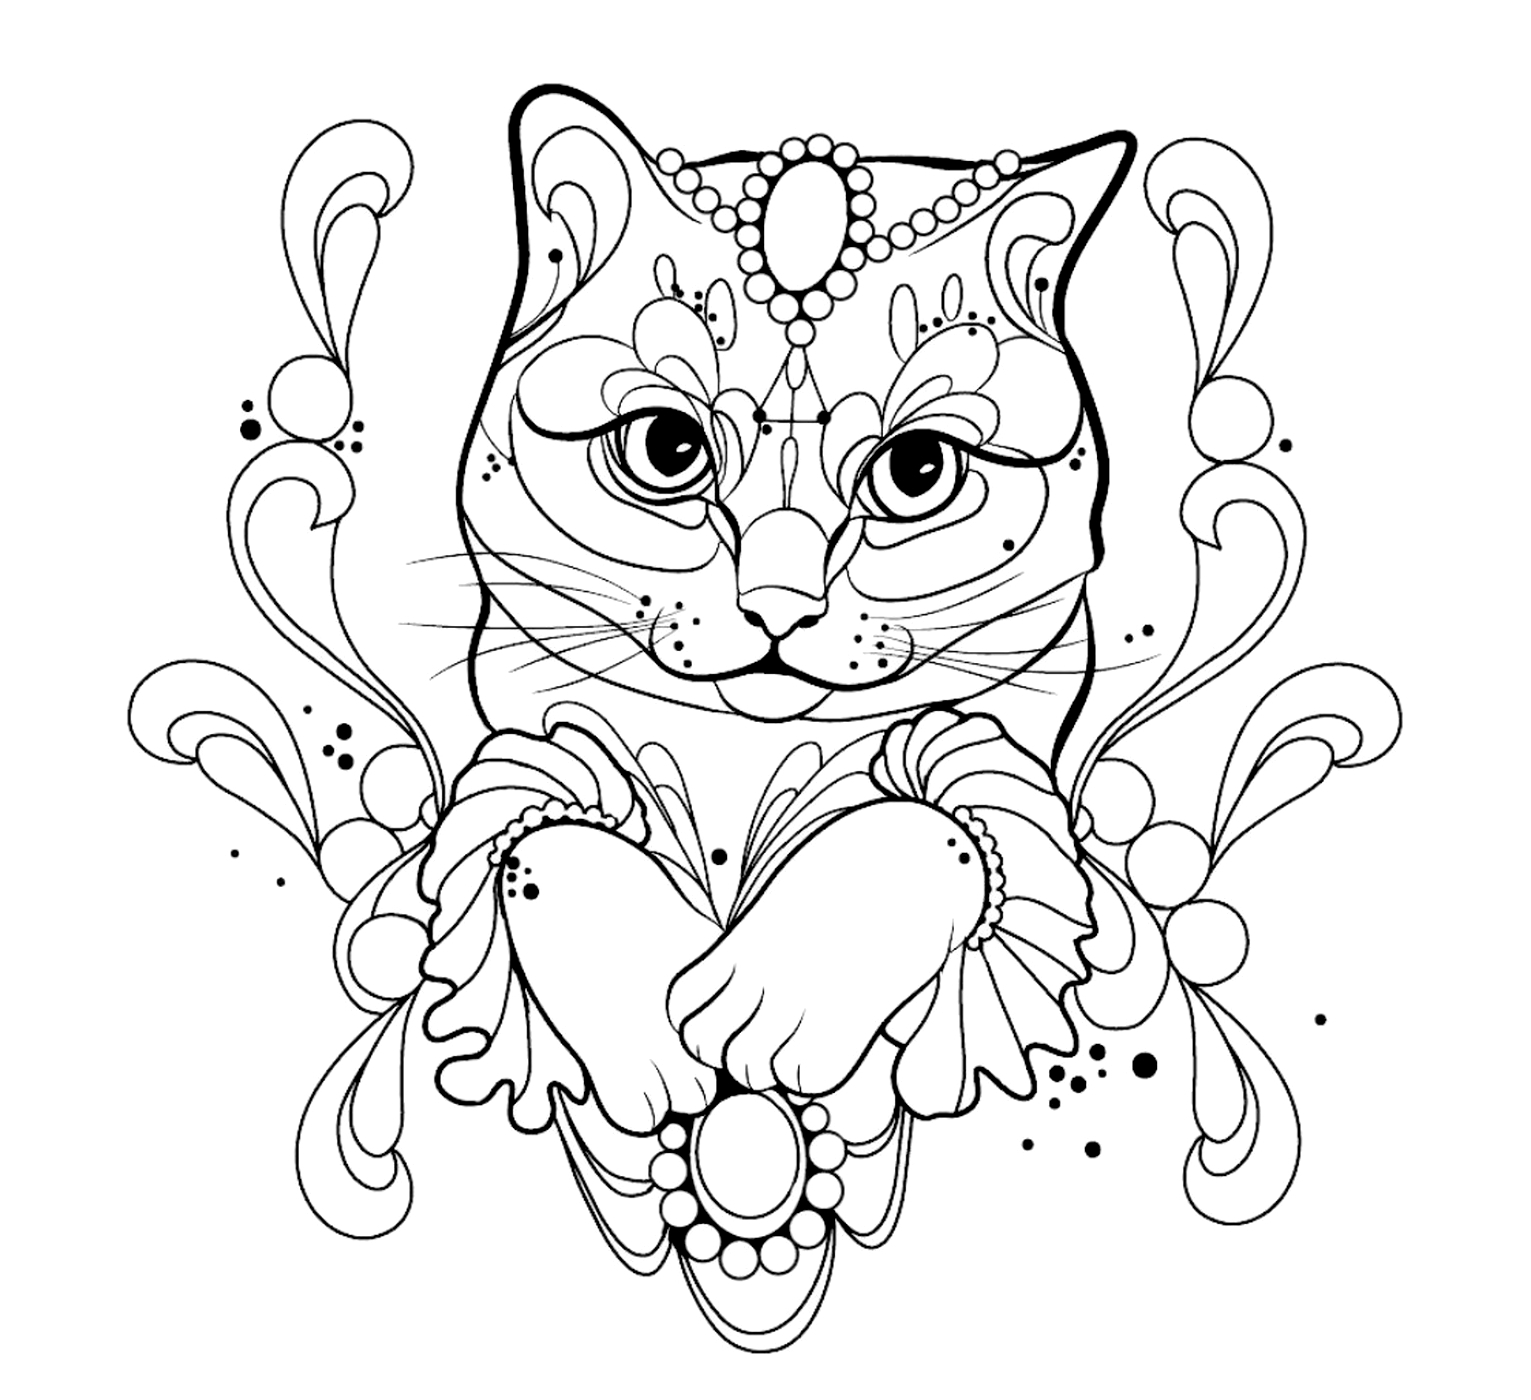 Coloring page mischievous patterned cat